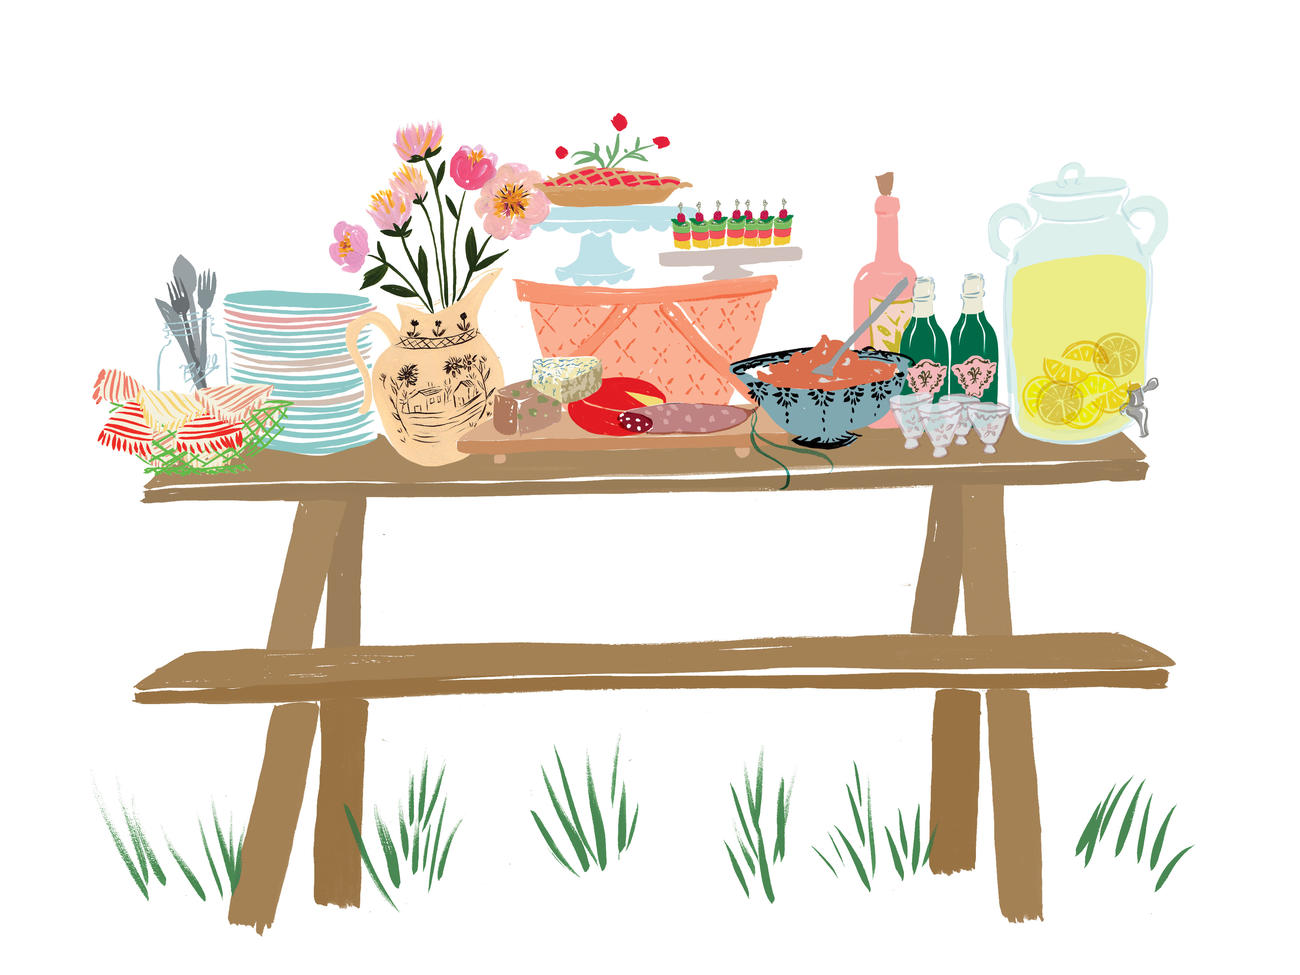 Celebrate Spring with a Picnic!